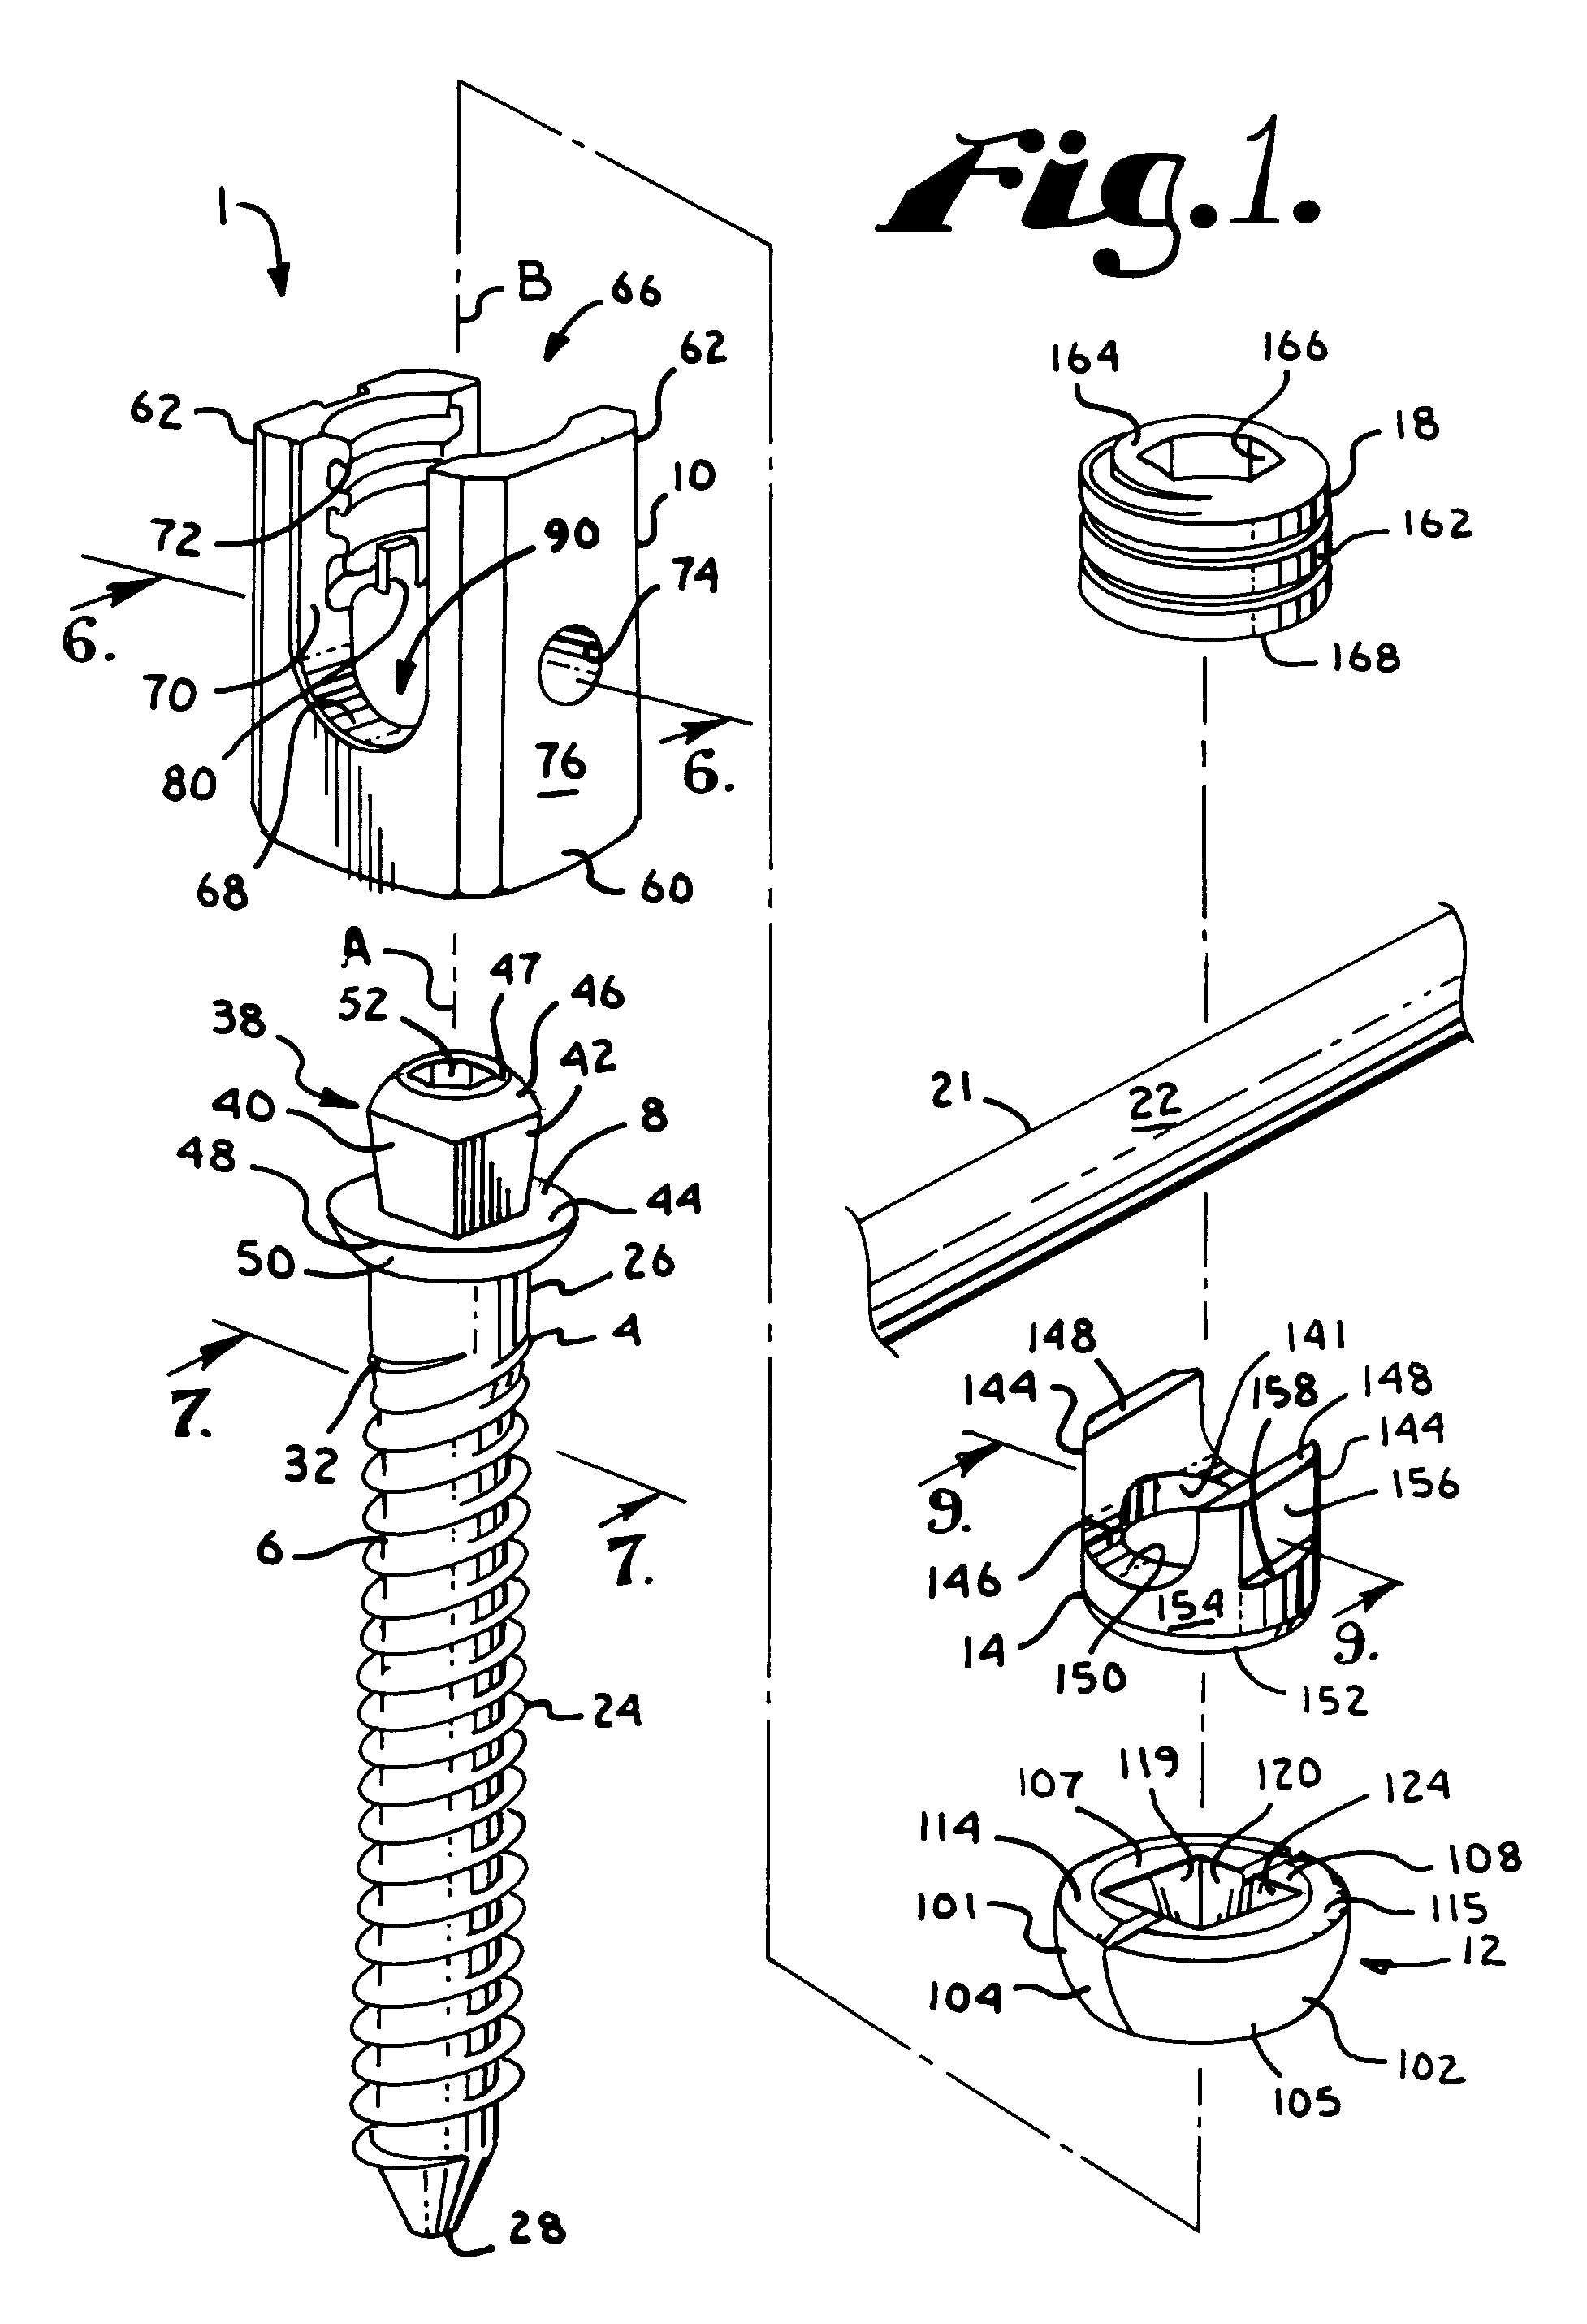 Polyaxial bone screw with multi-part shank retainer and pressure insert